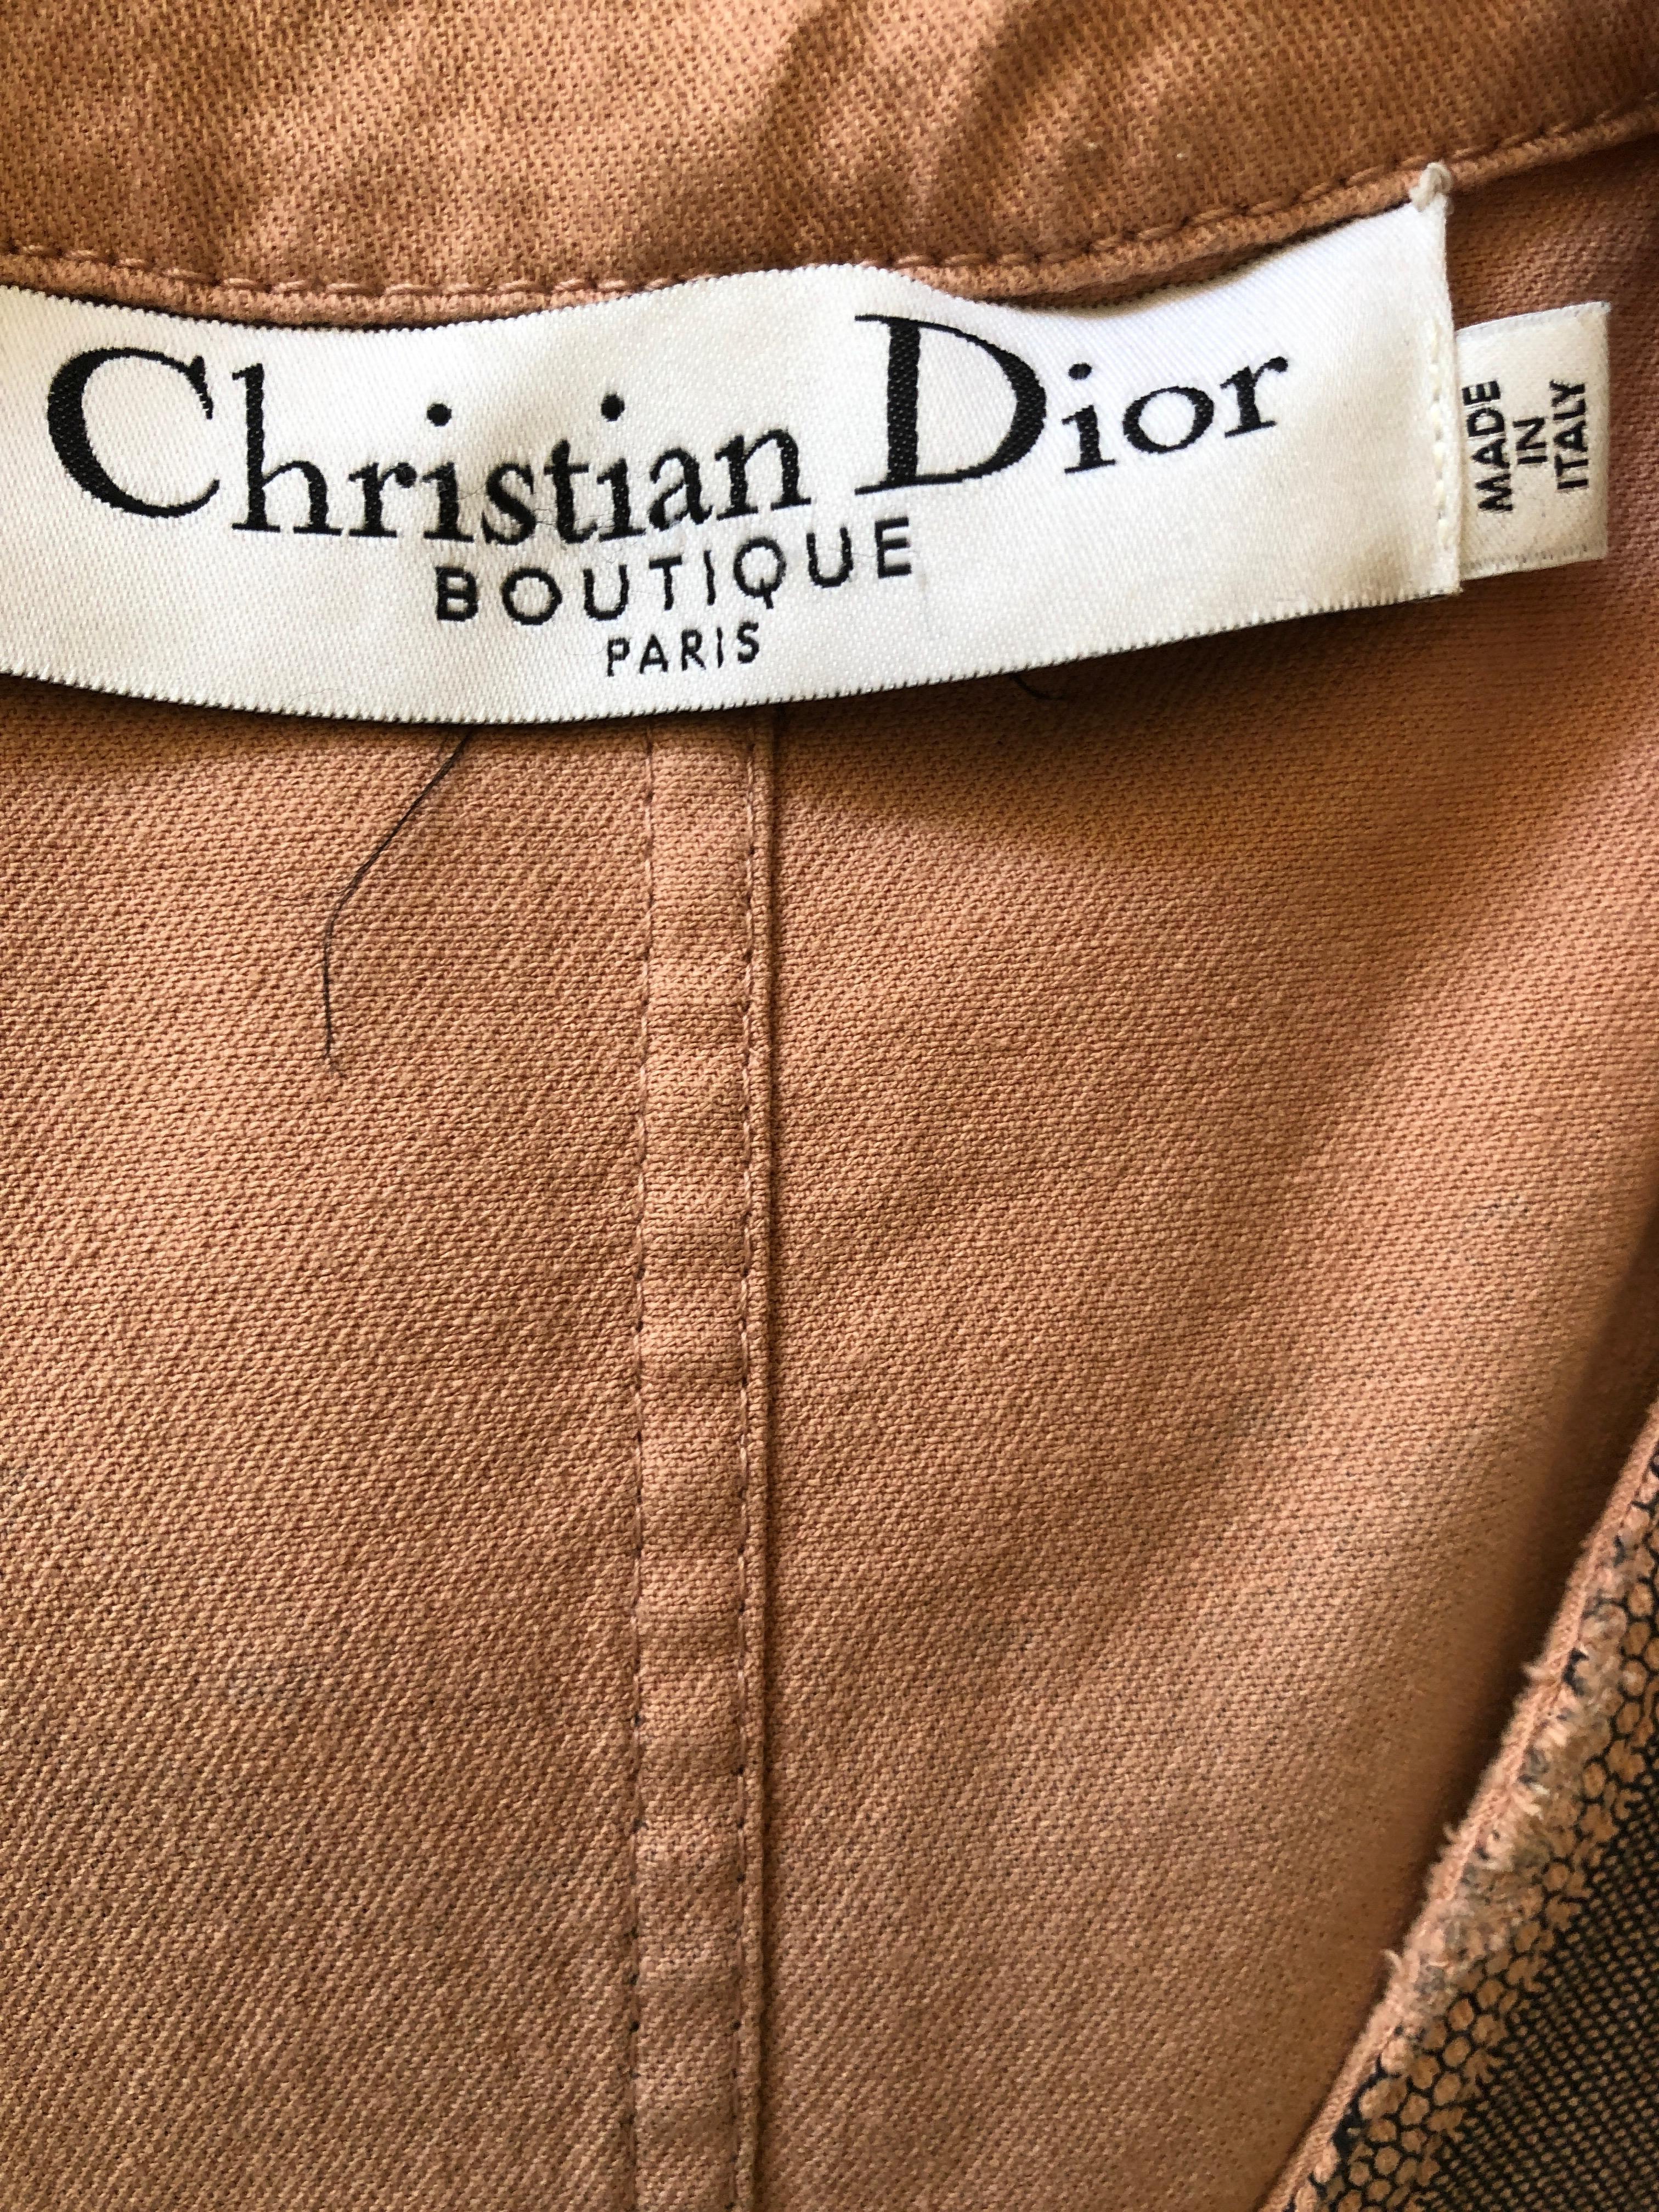 Christian Dior by John Galliano Tromp l'oeil Lace Accented Cotton Bar Coat For Sale 7